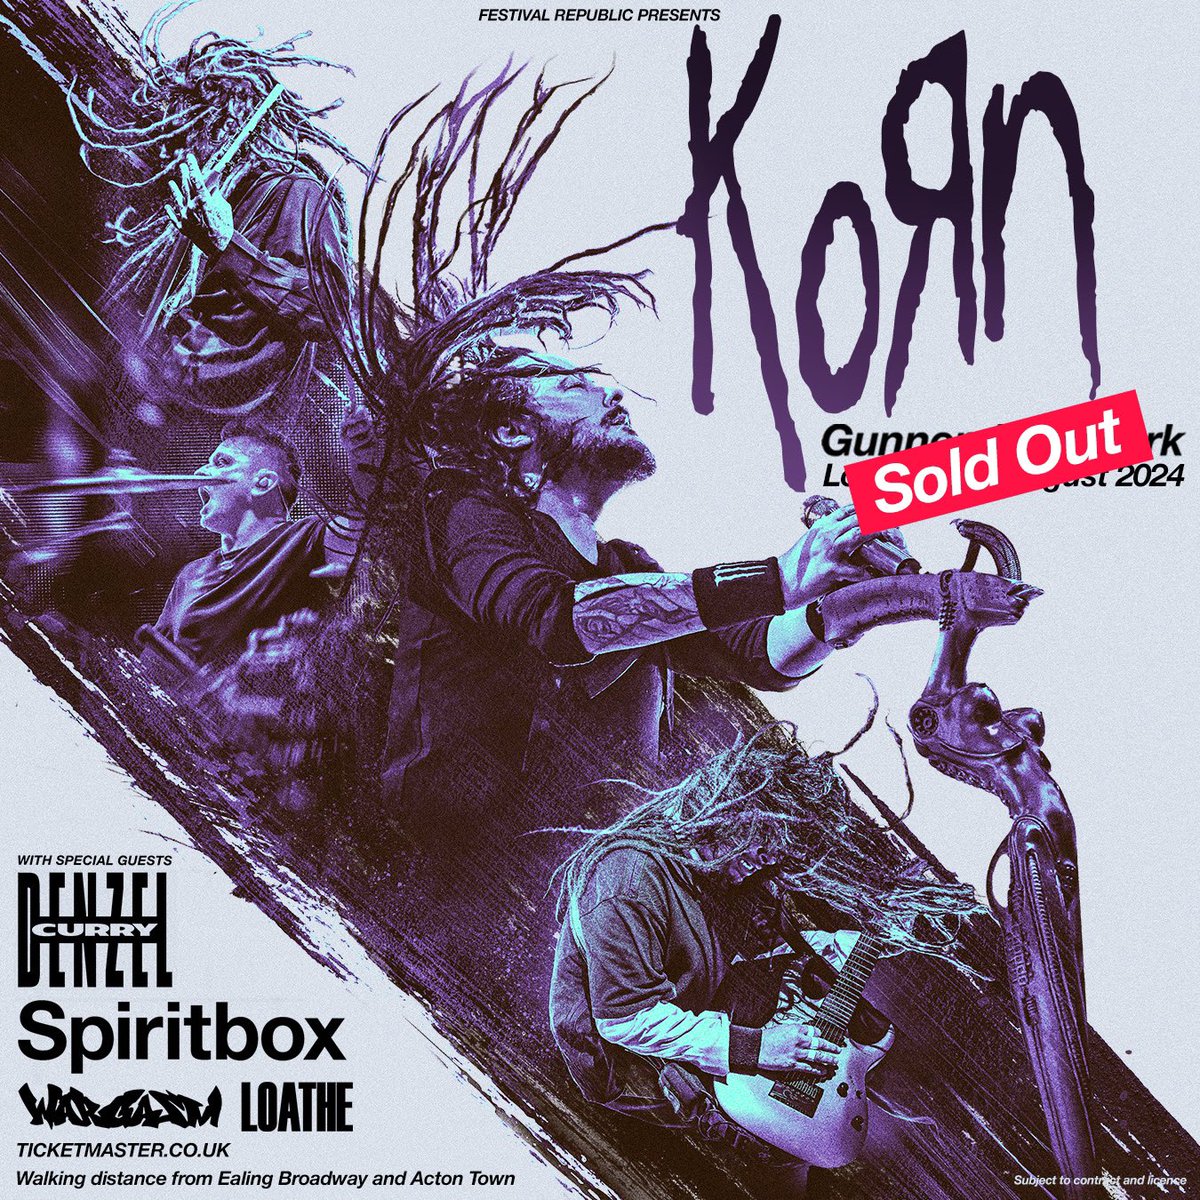 🚨 @Korn is now SOLD OUT 🚨 See you in Gunnersbury Park this August 🤘